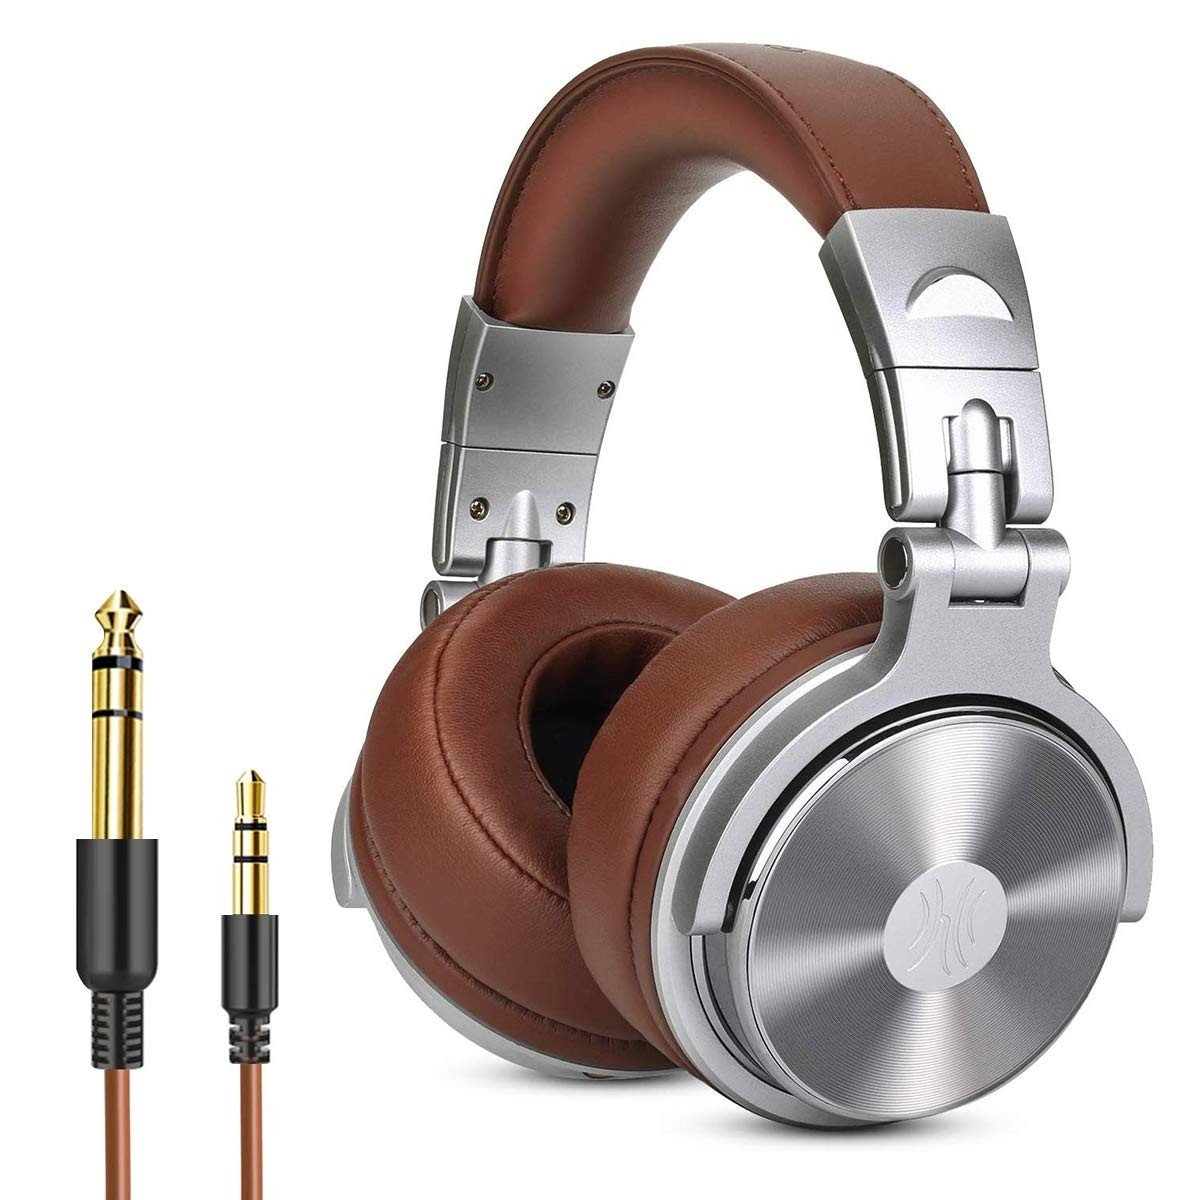 Over-Ear Headphone Wired Premium Stereo Sound Headsets